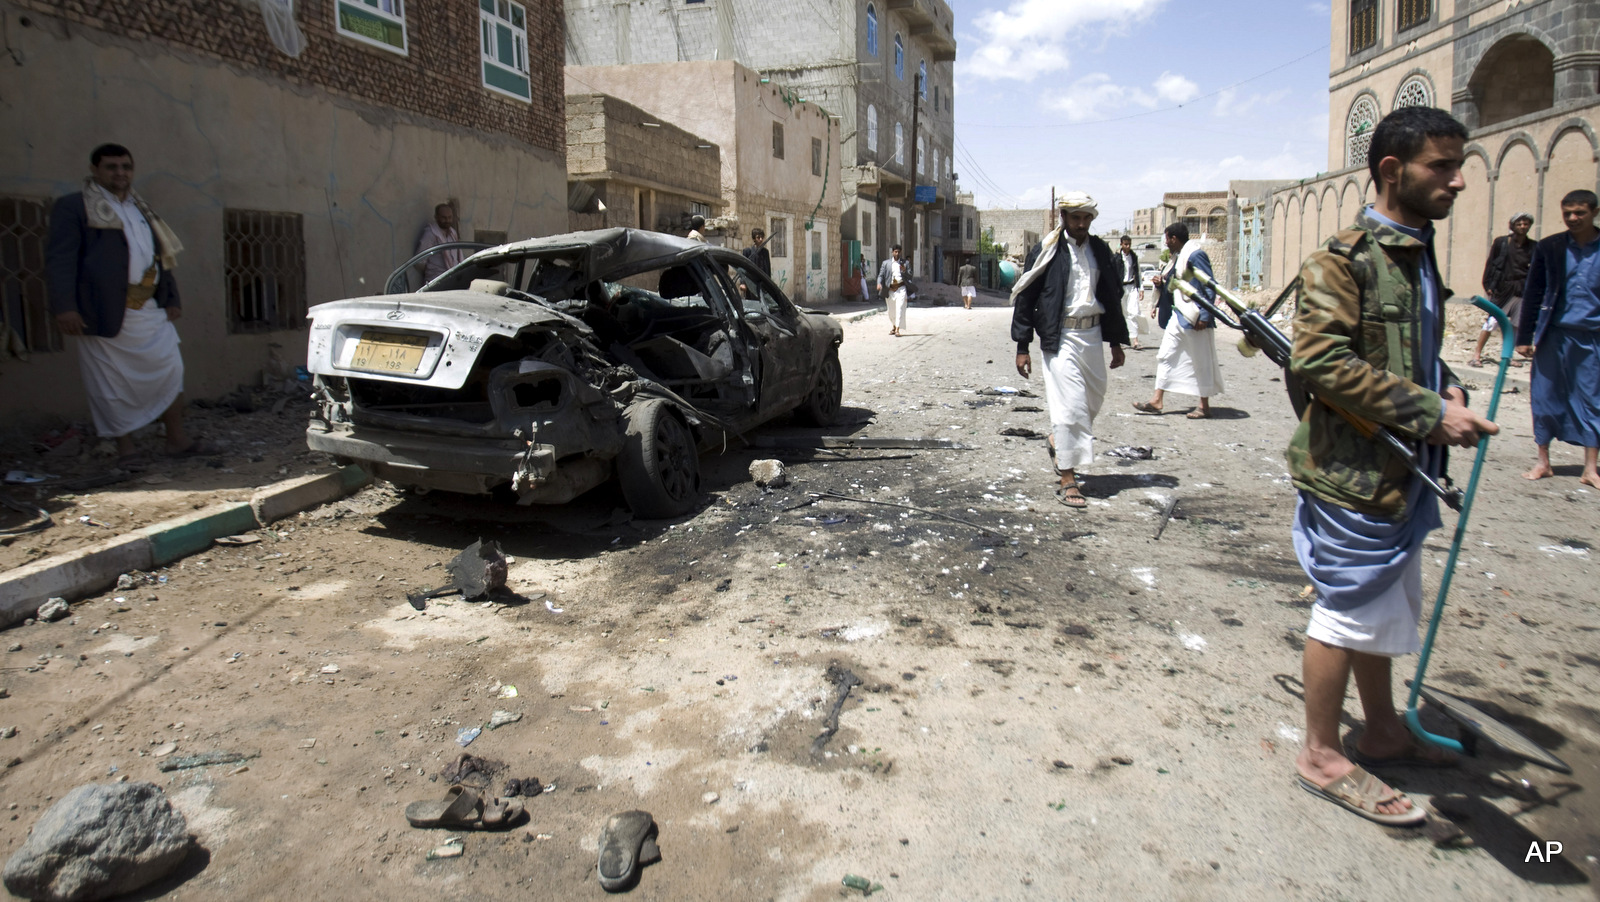 Houthis near a damaged car after a bomb attack in Sanaa, Yemen, Friday, March 20, 2015.